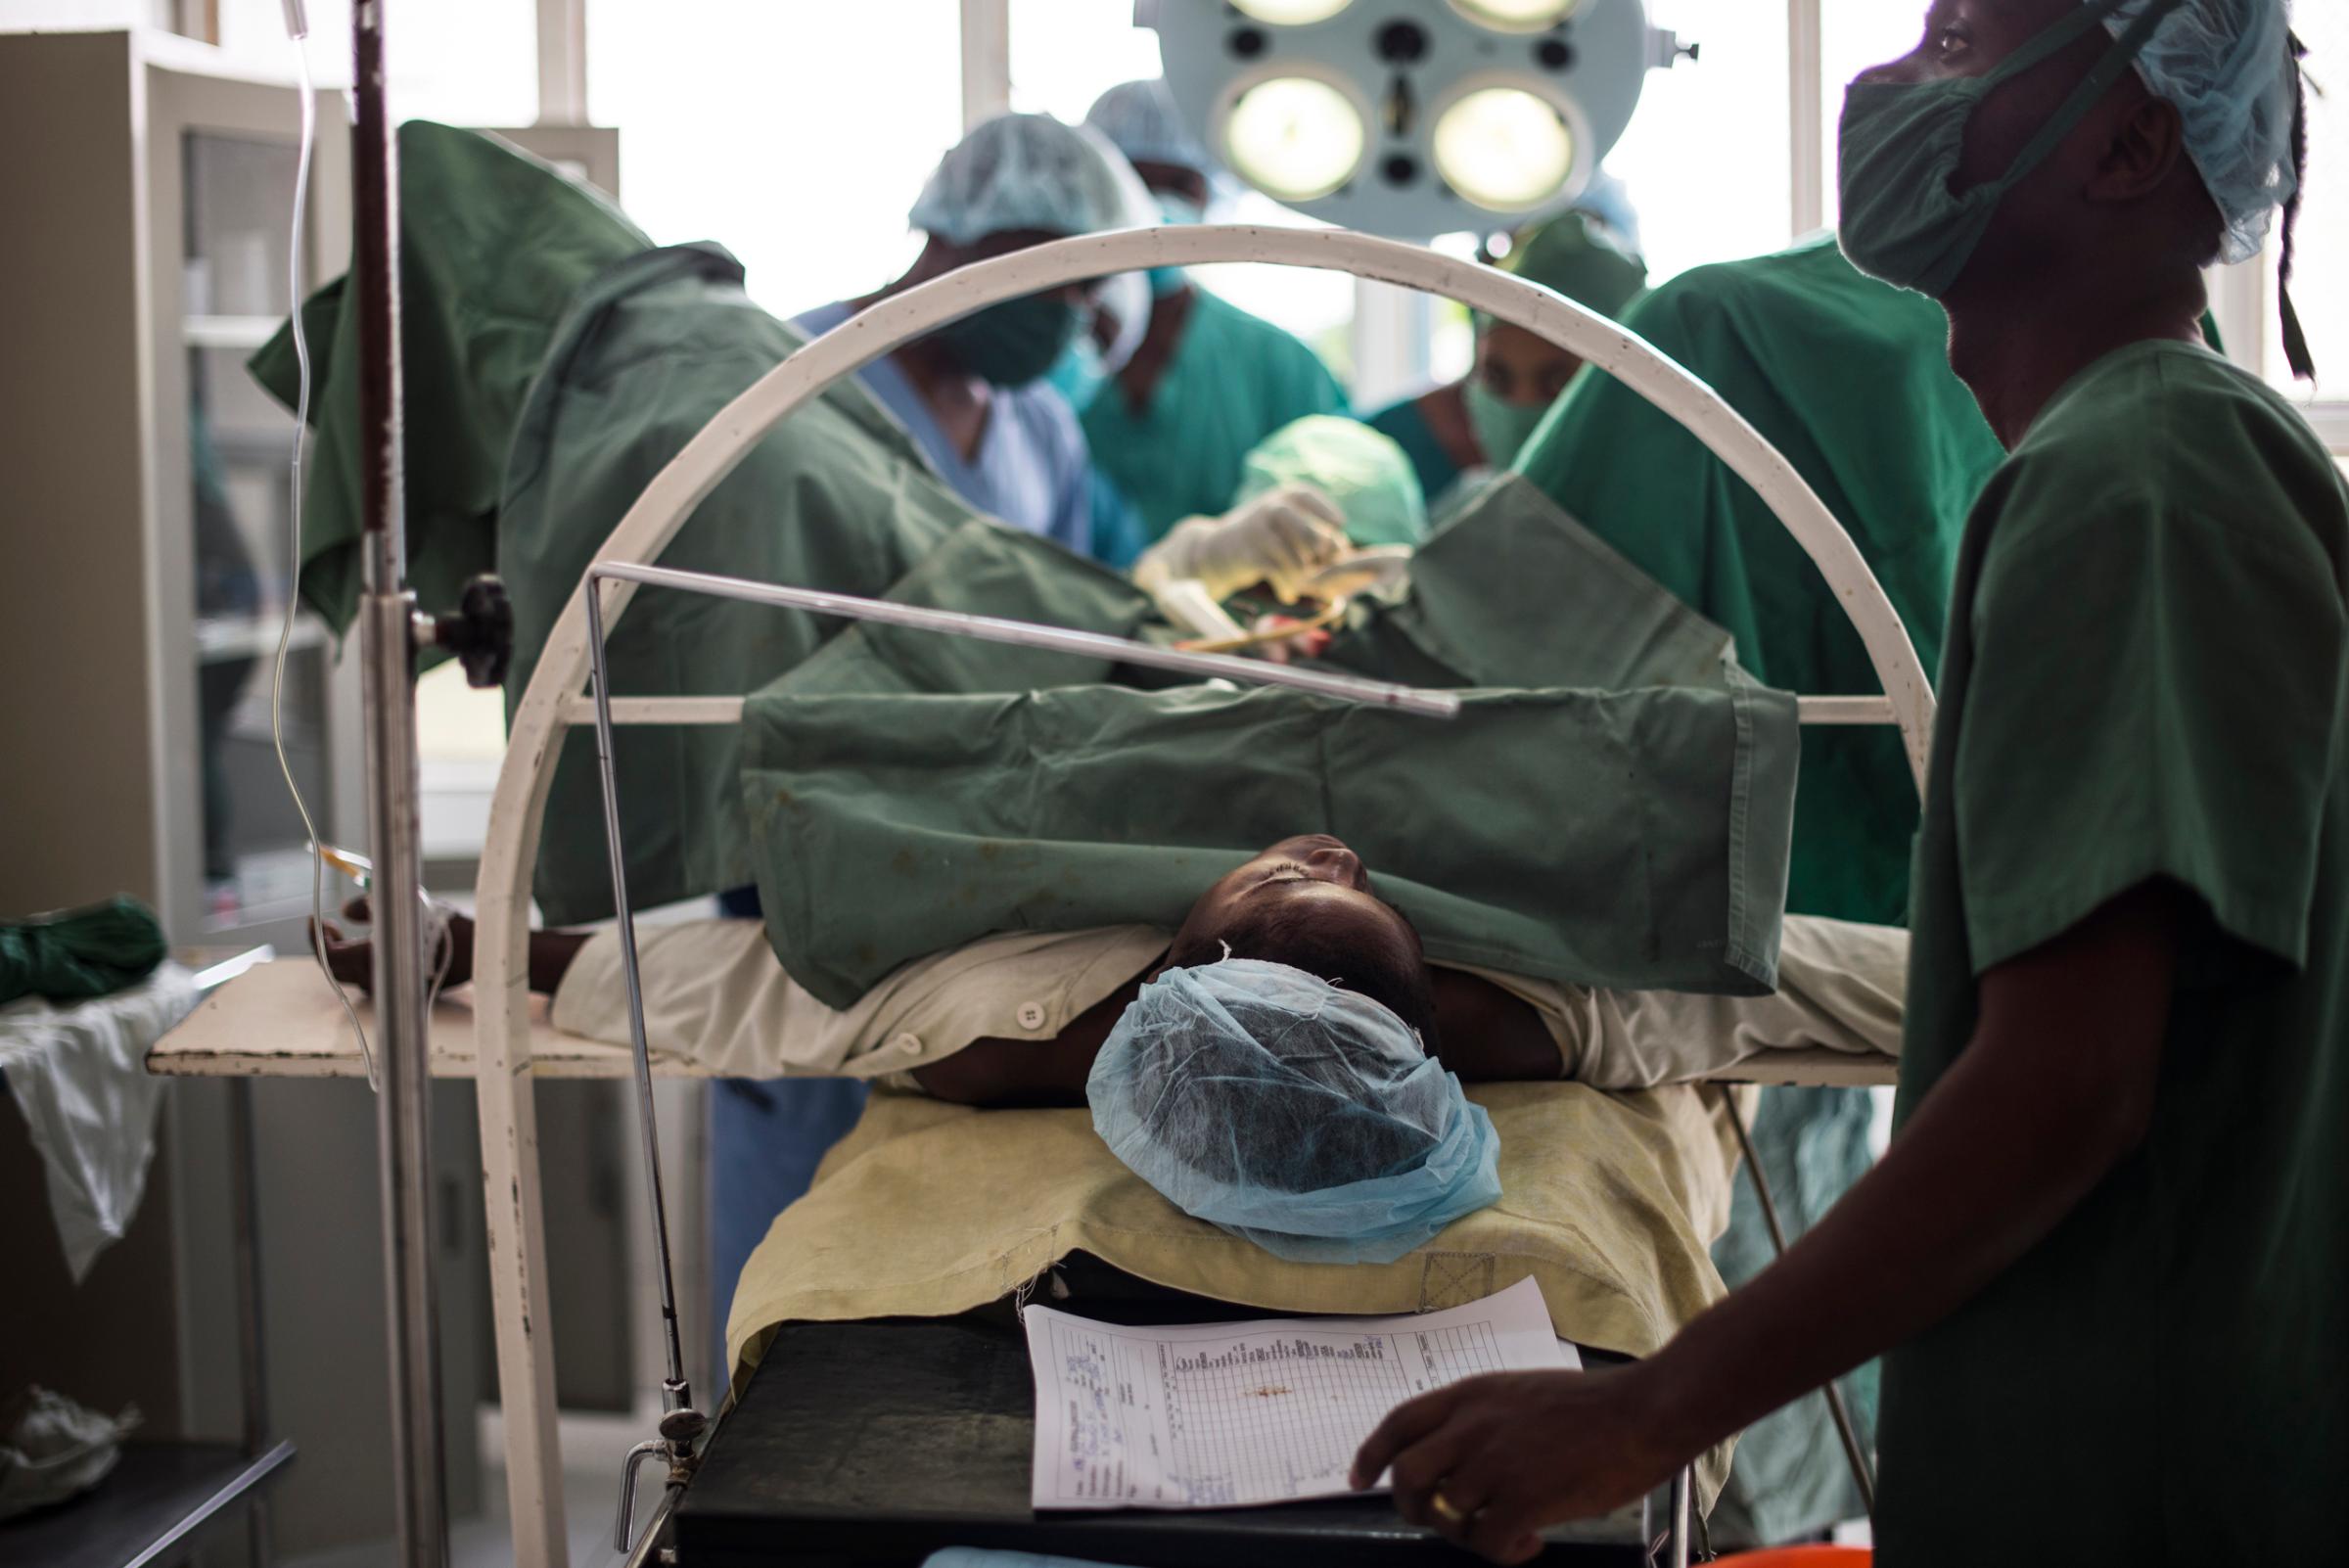 A woman receives fistula repair surgery in the Keyshero hospital in Goma, Democratic Republic of Congo, Dec. 5, 2015. Many women need fistula repair after rape. it is one of the biggest injuries post sexual assault. Women with fistulas from rape cannot retain their urine or feces.